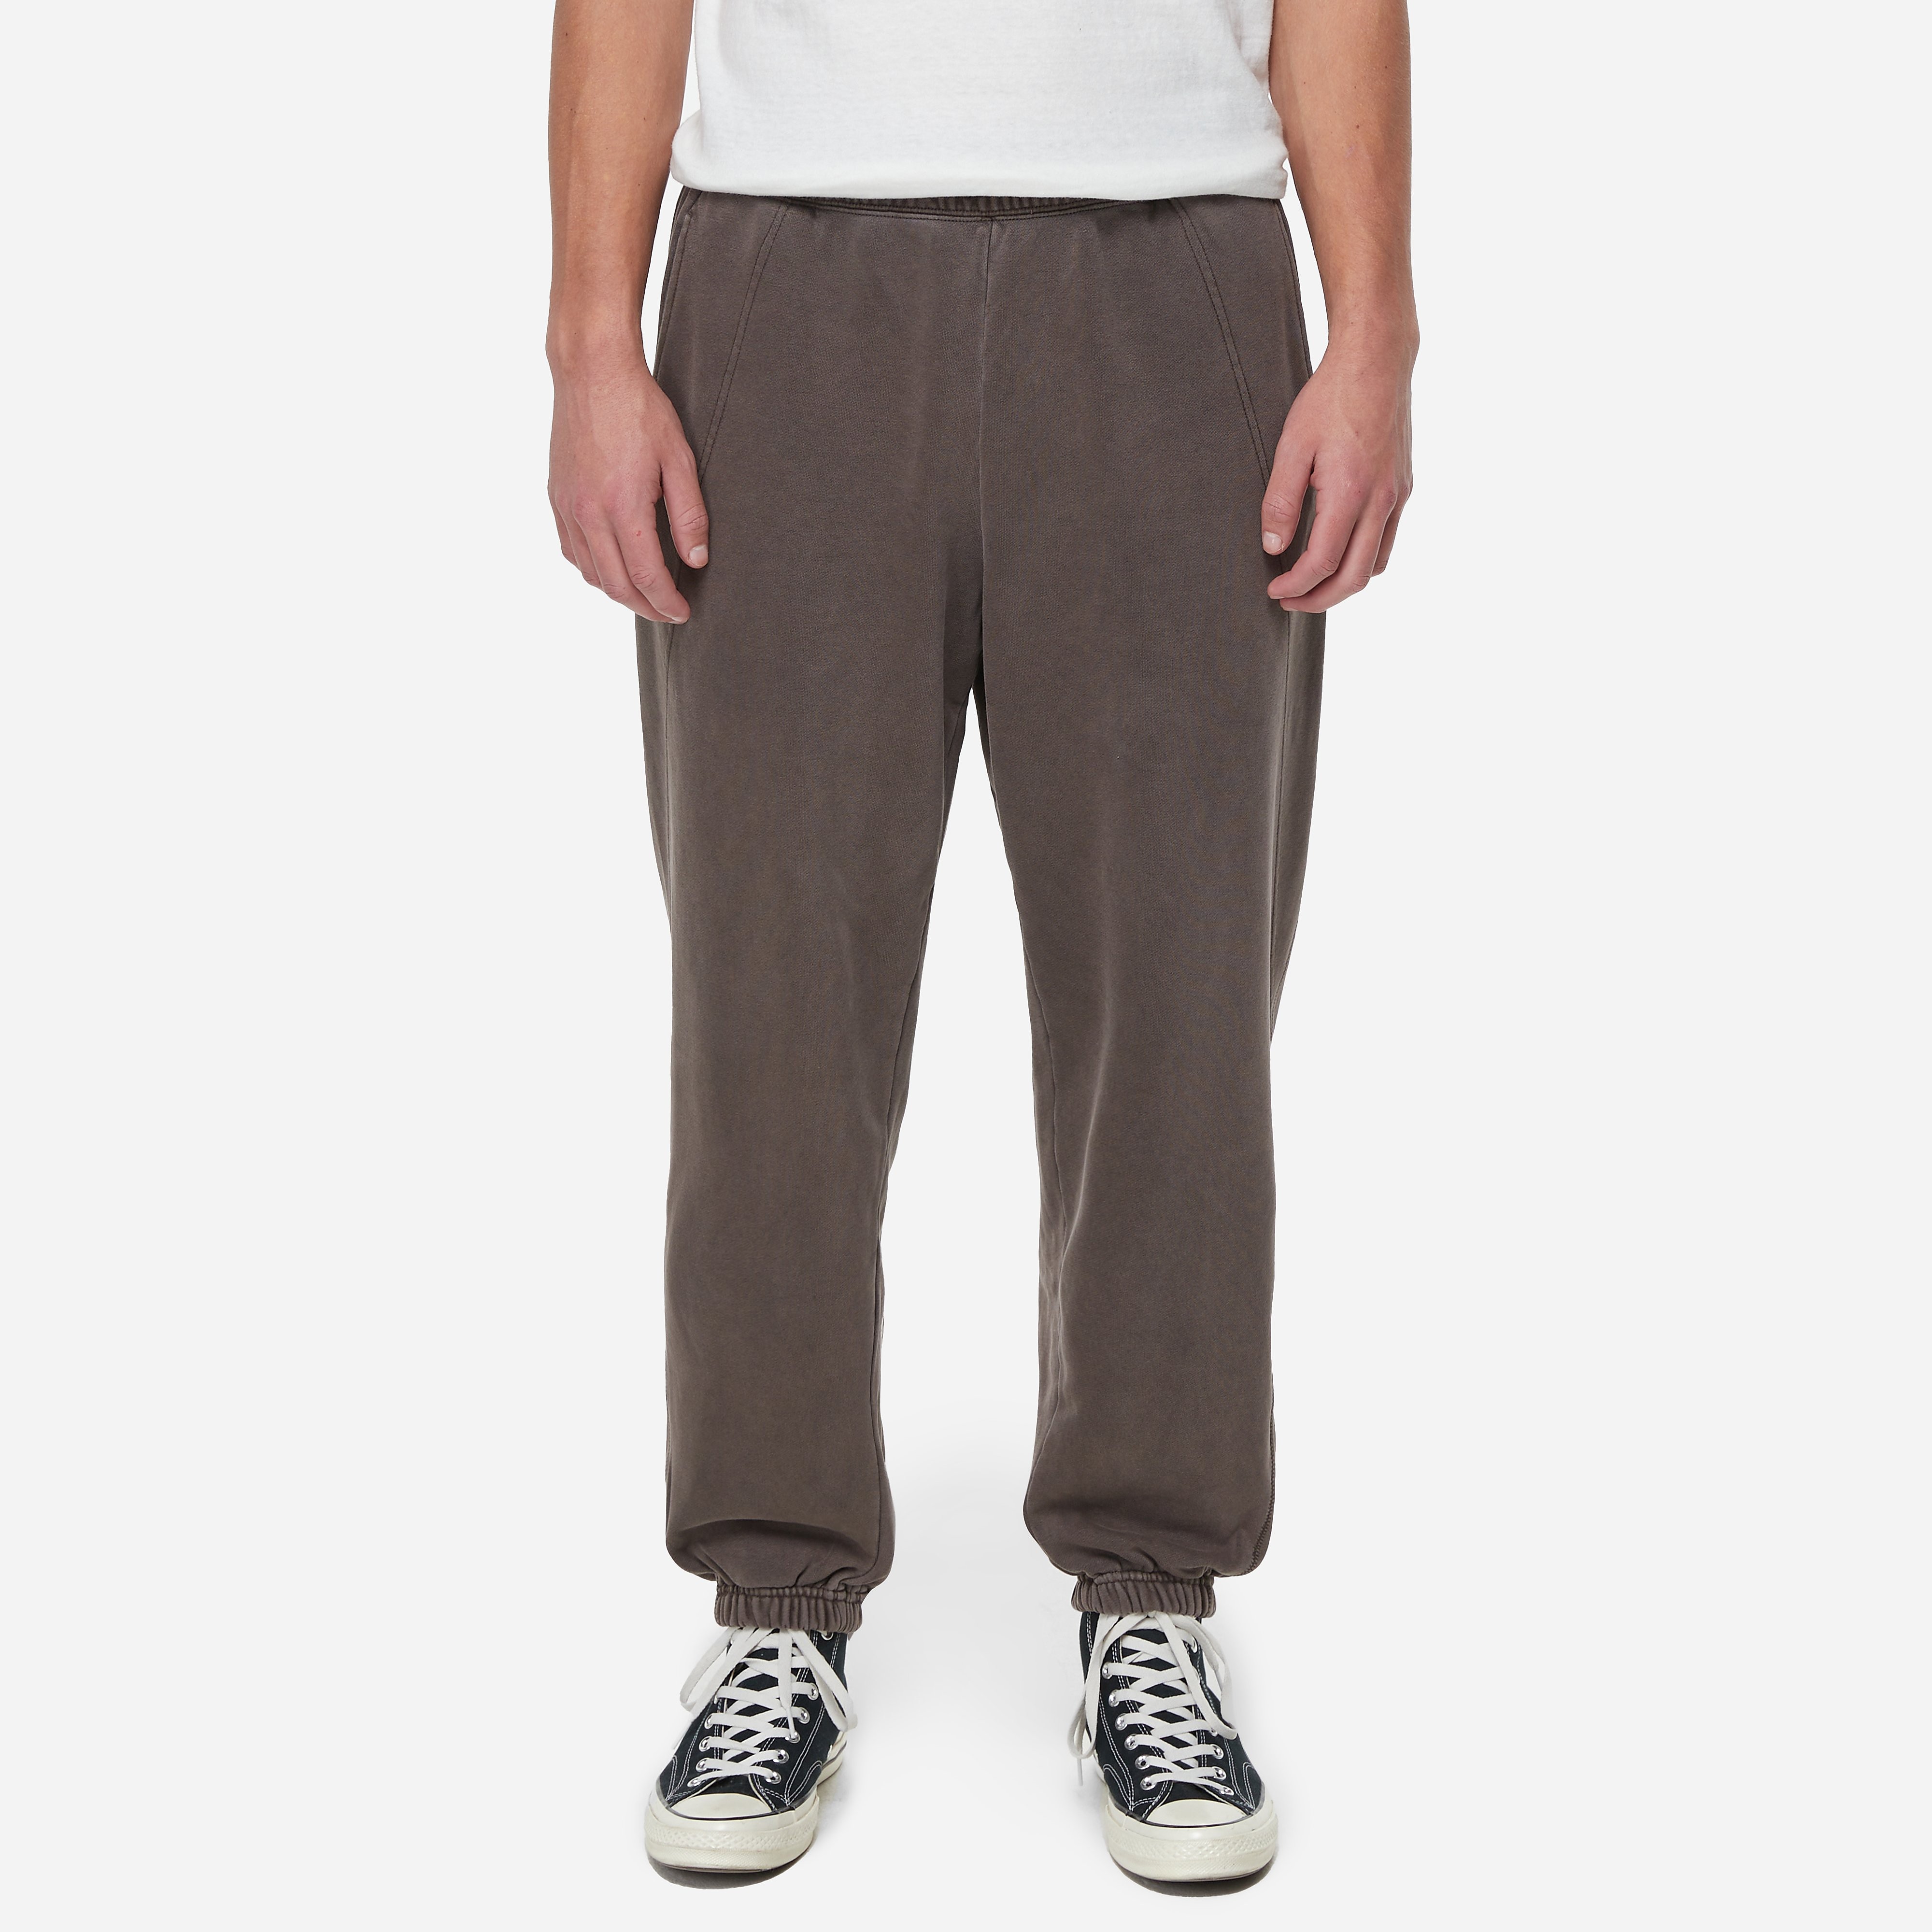 converse x a-cold-wall* track pant, brown